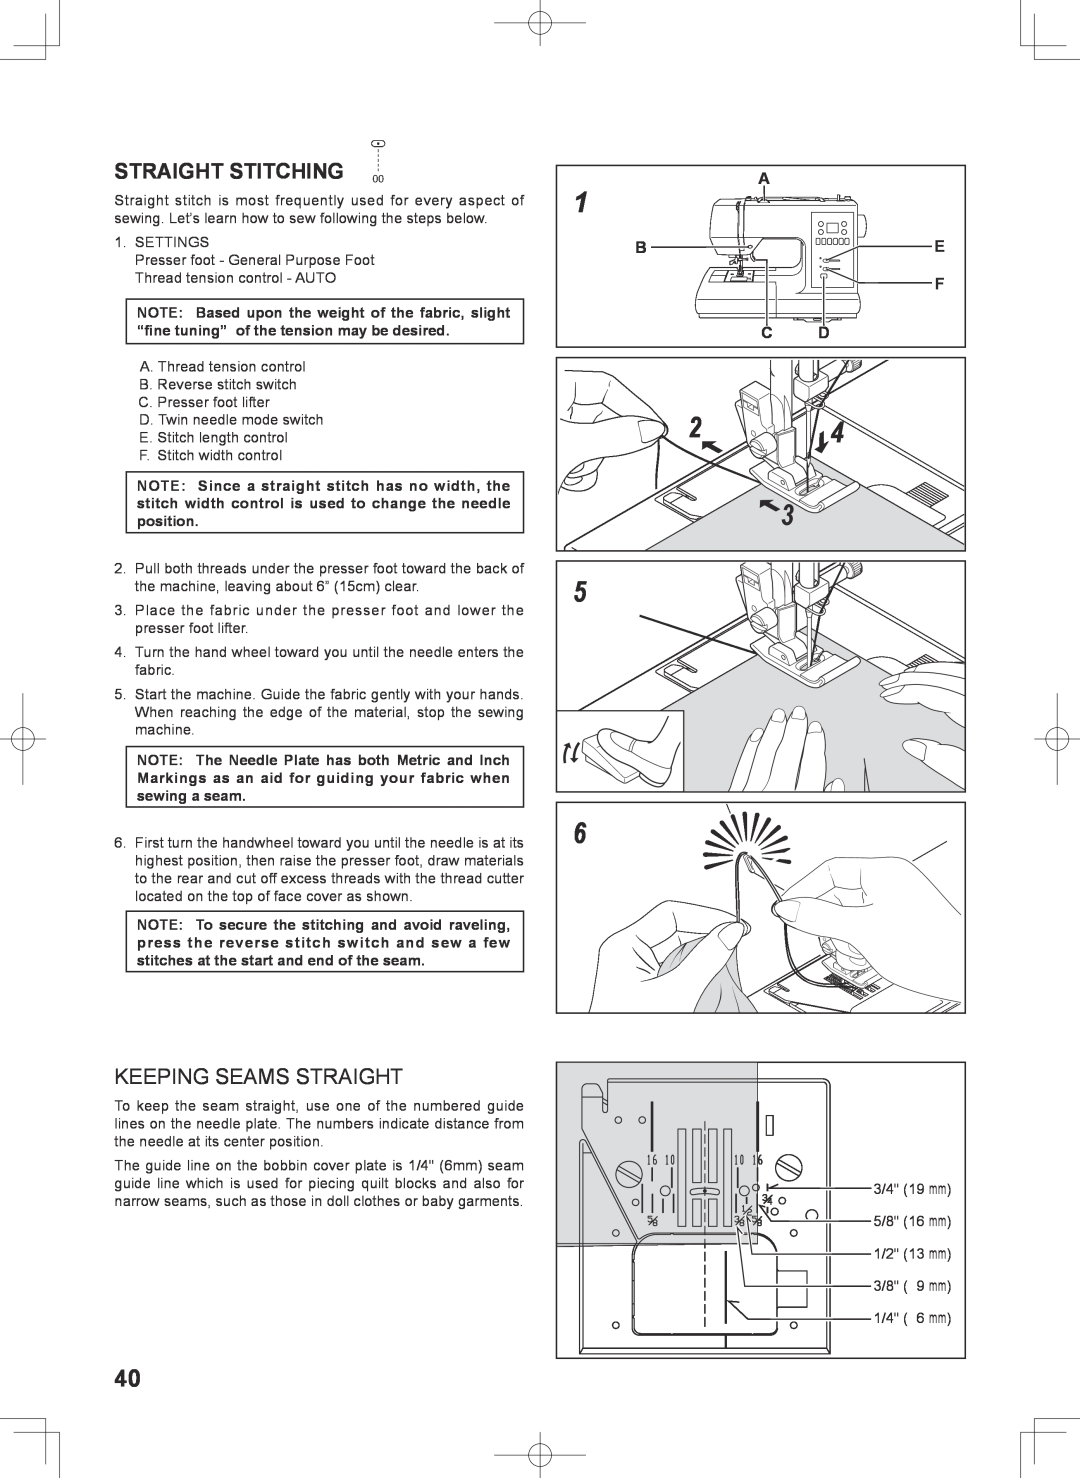 Singer 7467S instruction manual Straight Stitching, Keeping Seams Straight 